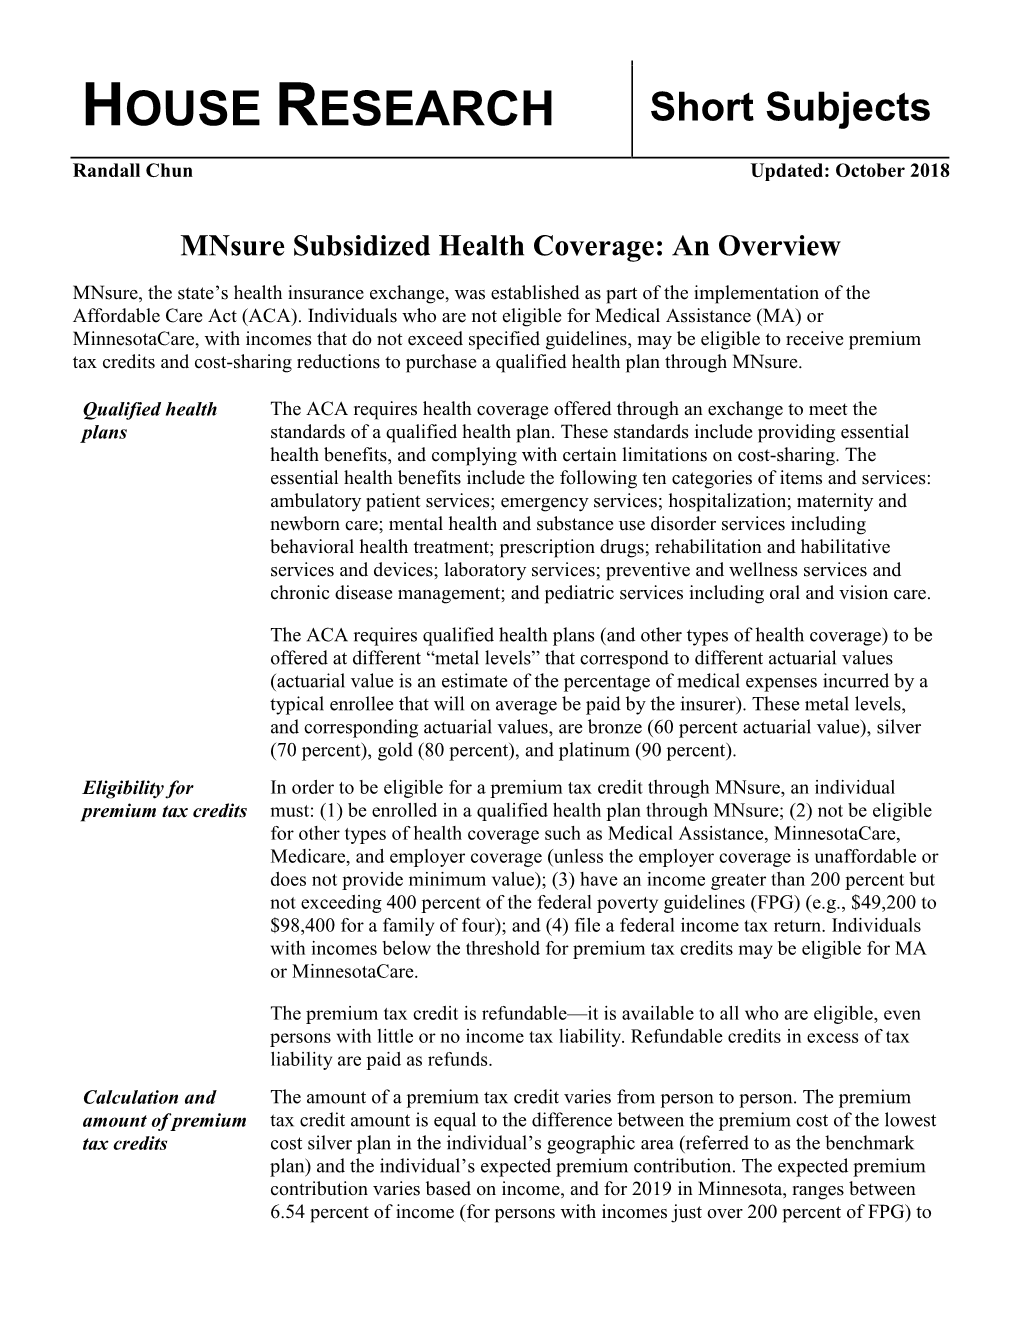 Mnsure Subsidized Health Coverage: an Overview